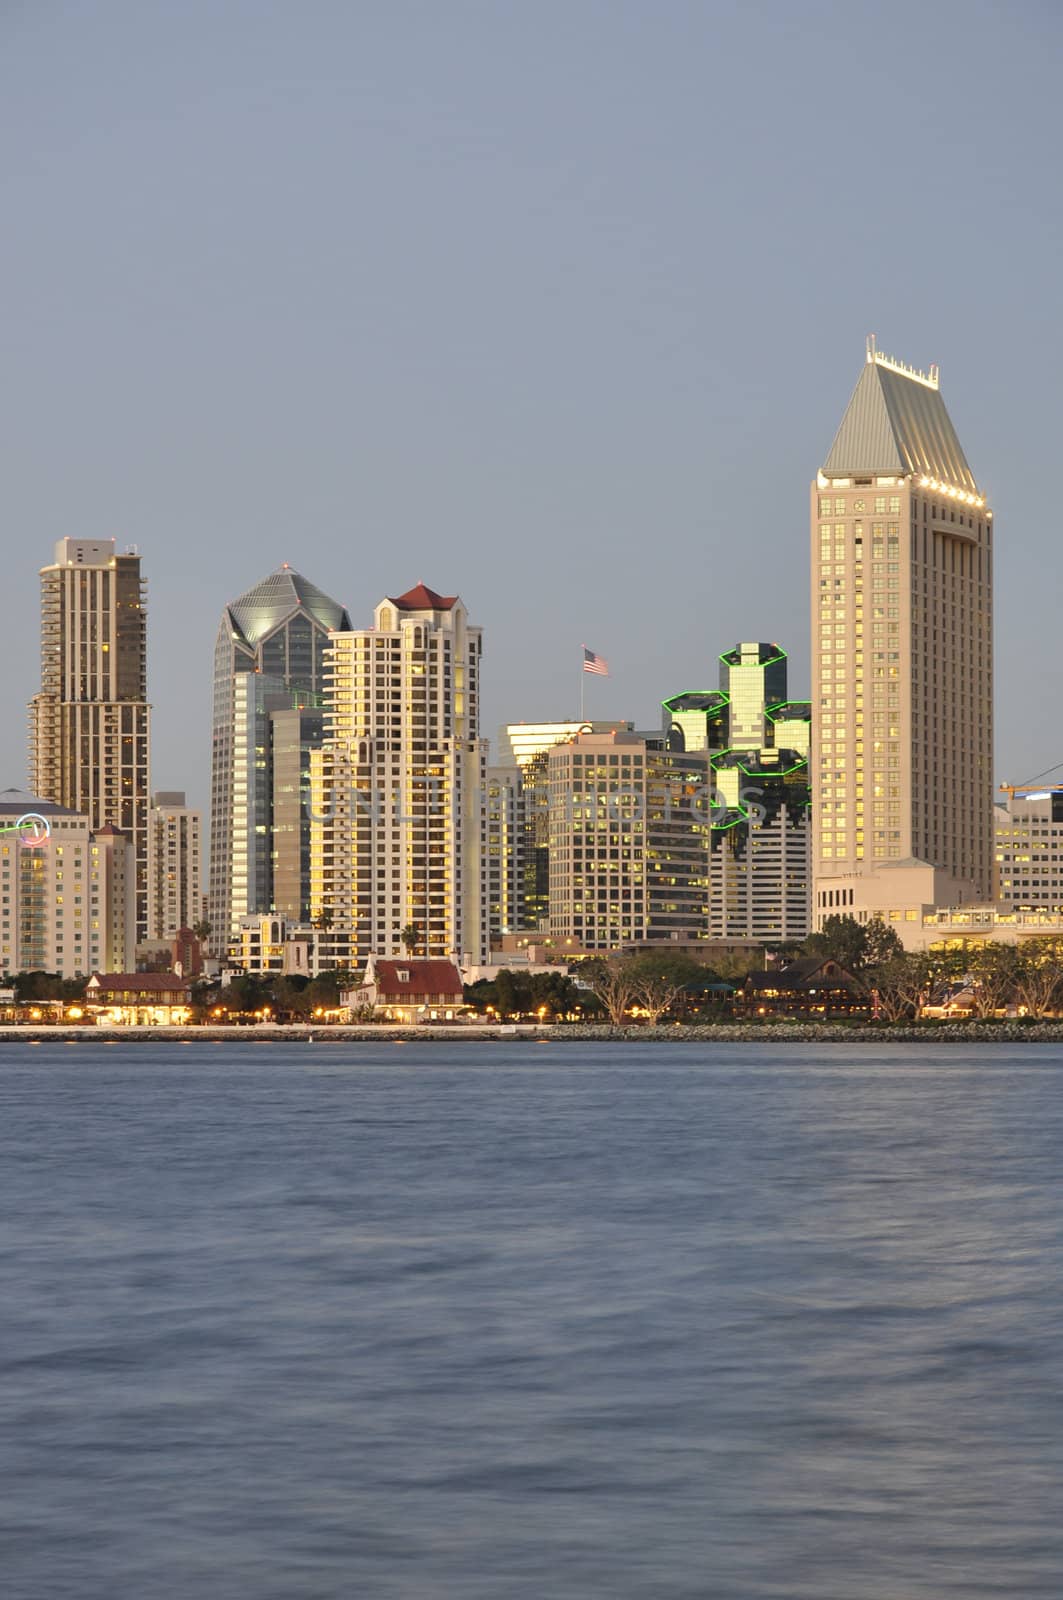 The last rays of sunlight reflect off of the waterfront towers in San Diego, California.